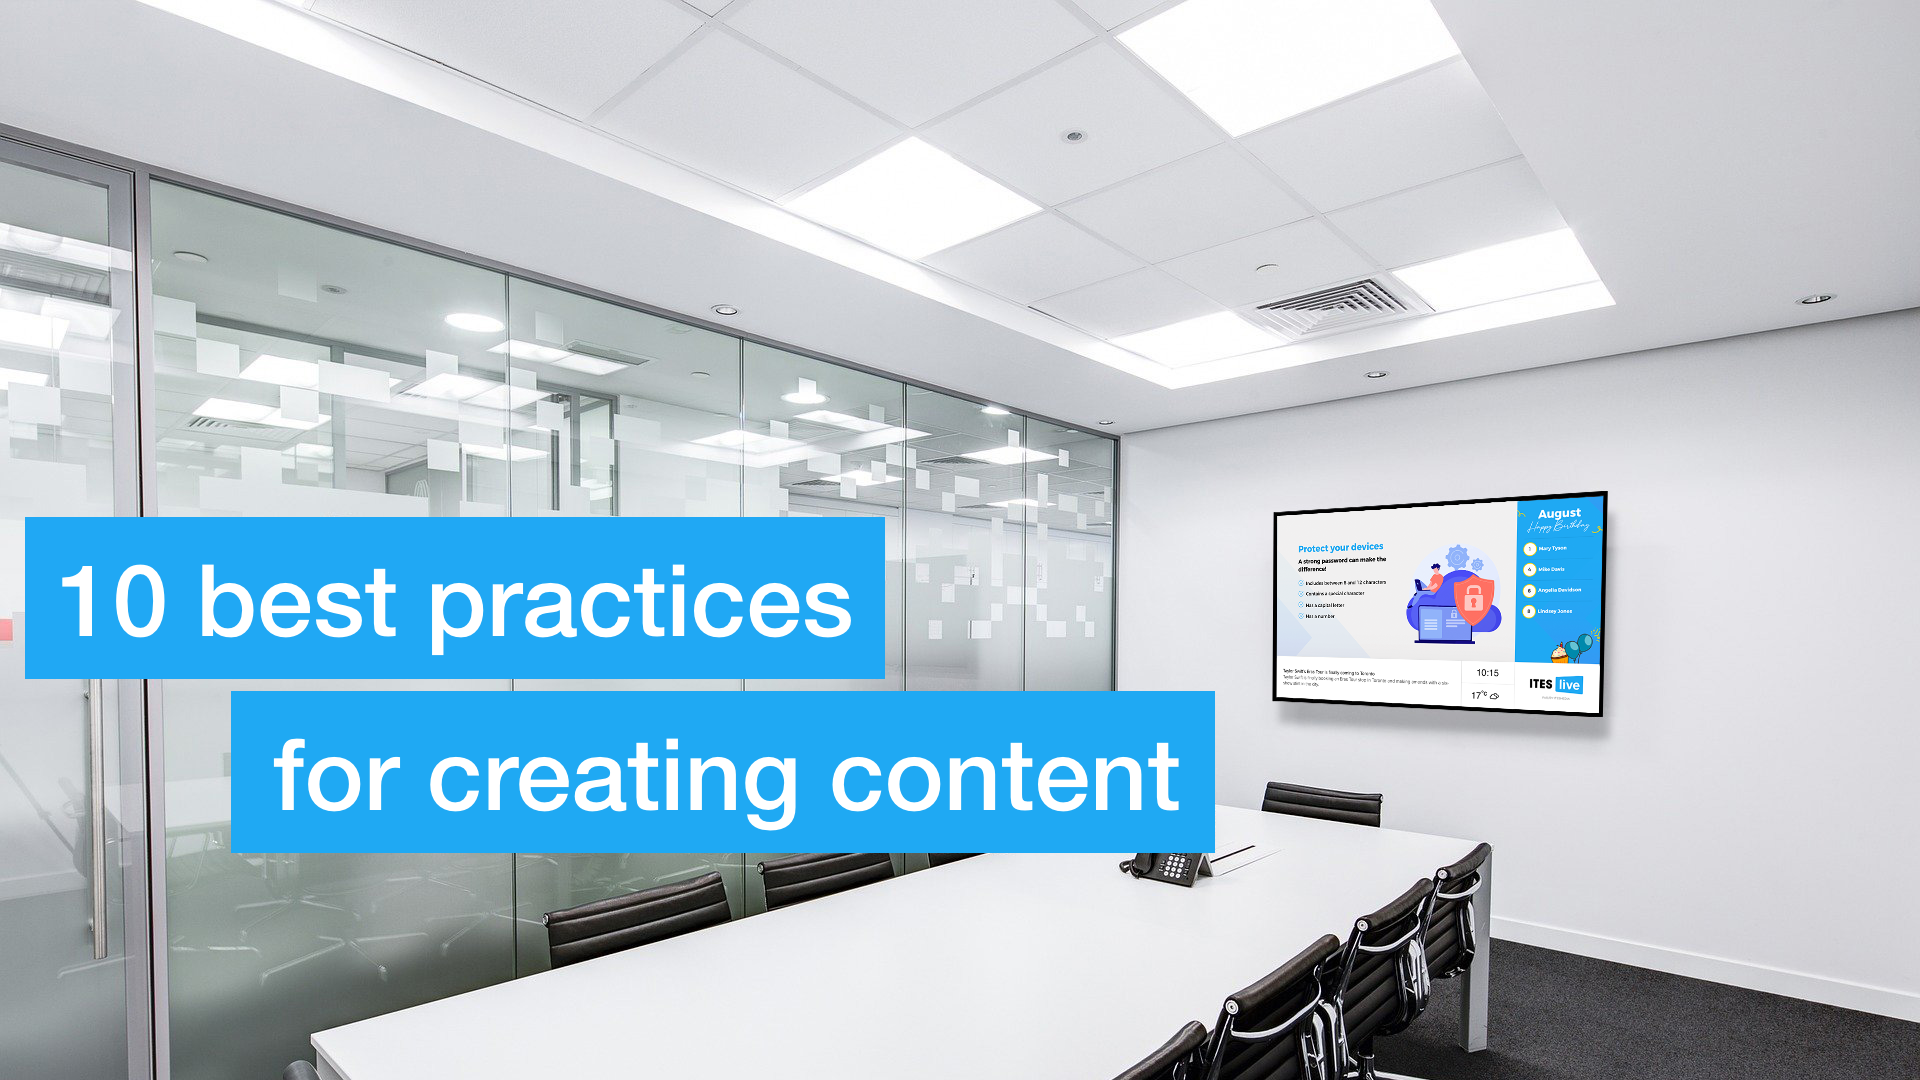 Video - 10 best practices for creating content